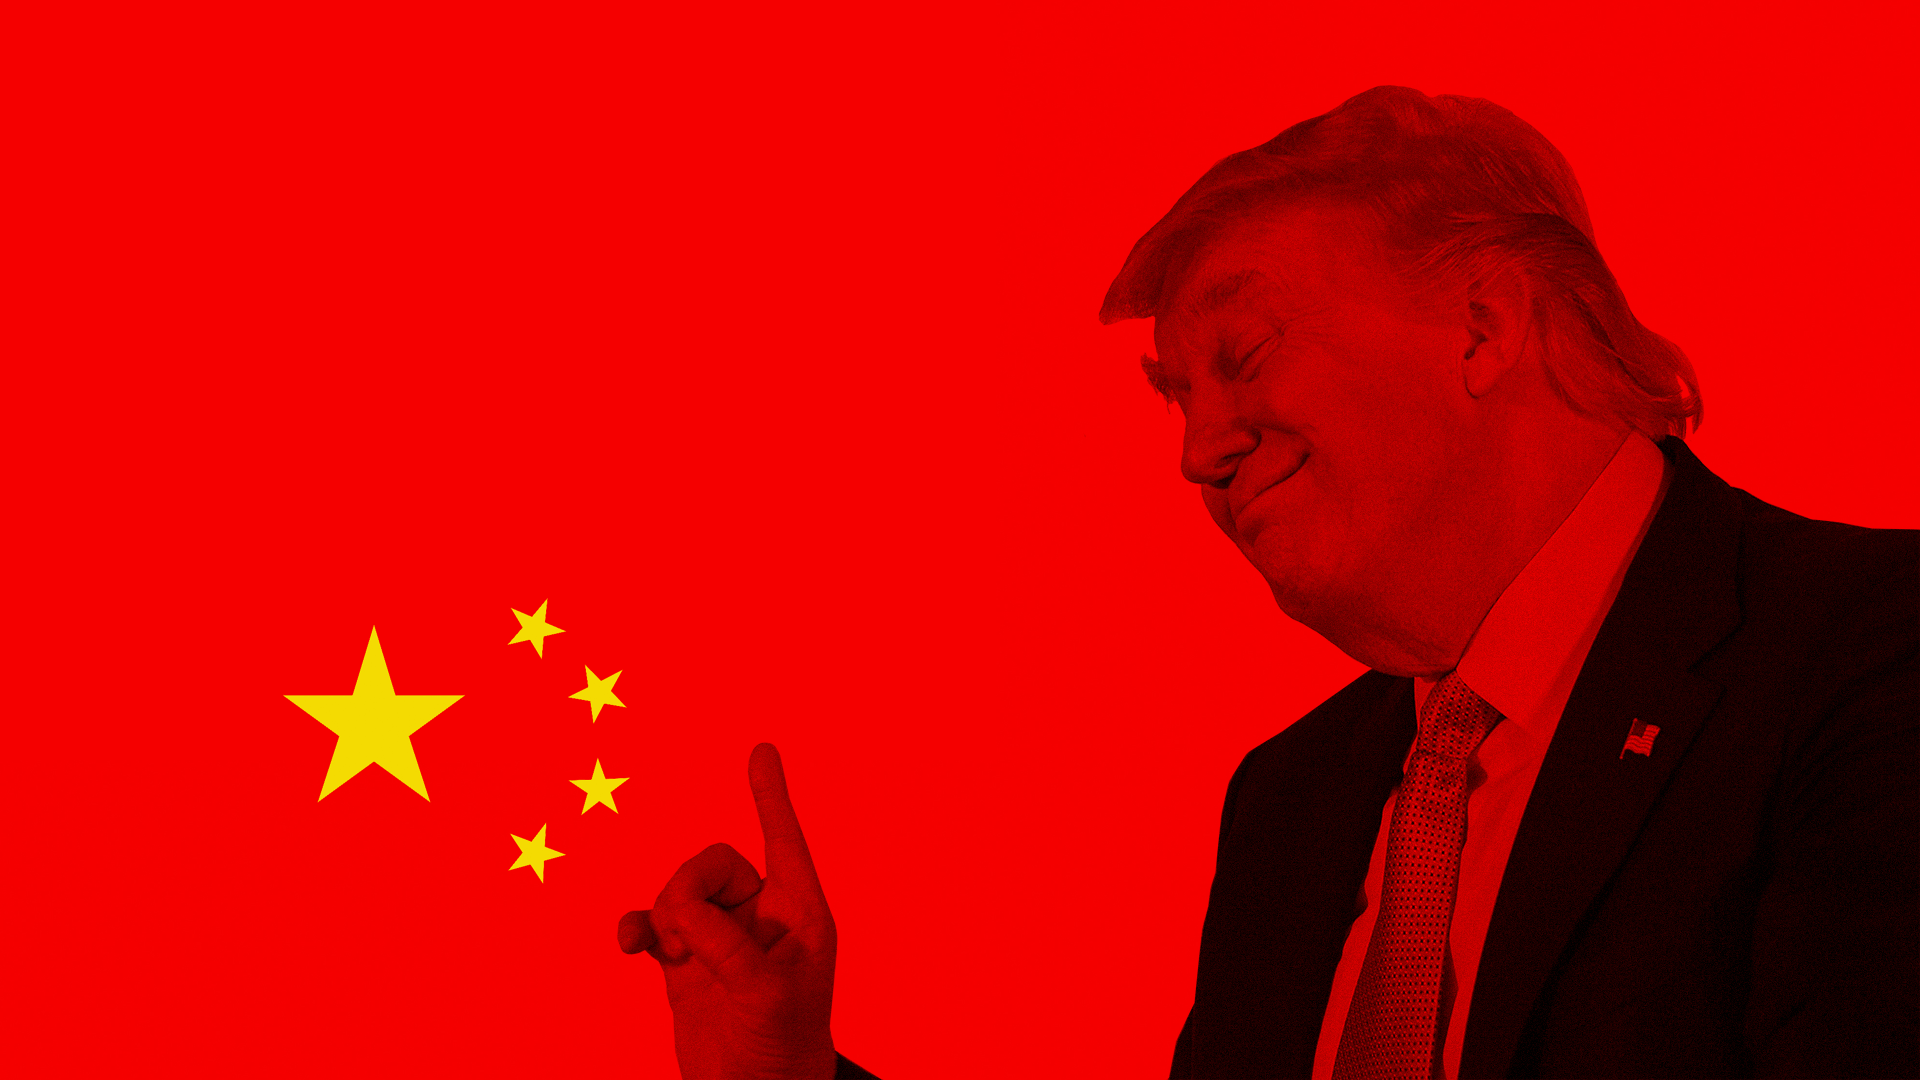 Animated GIF of President Trump wagging his finger at China's stars